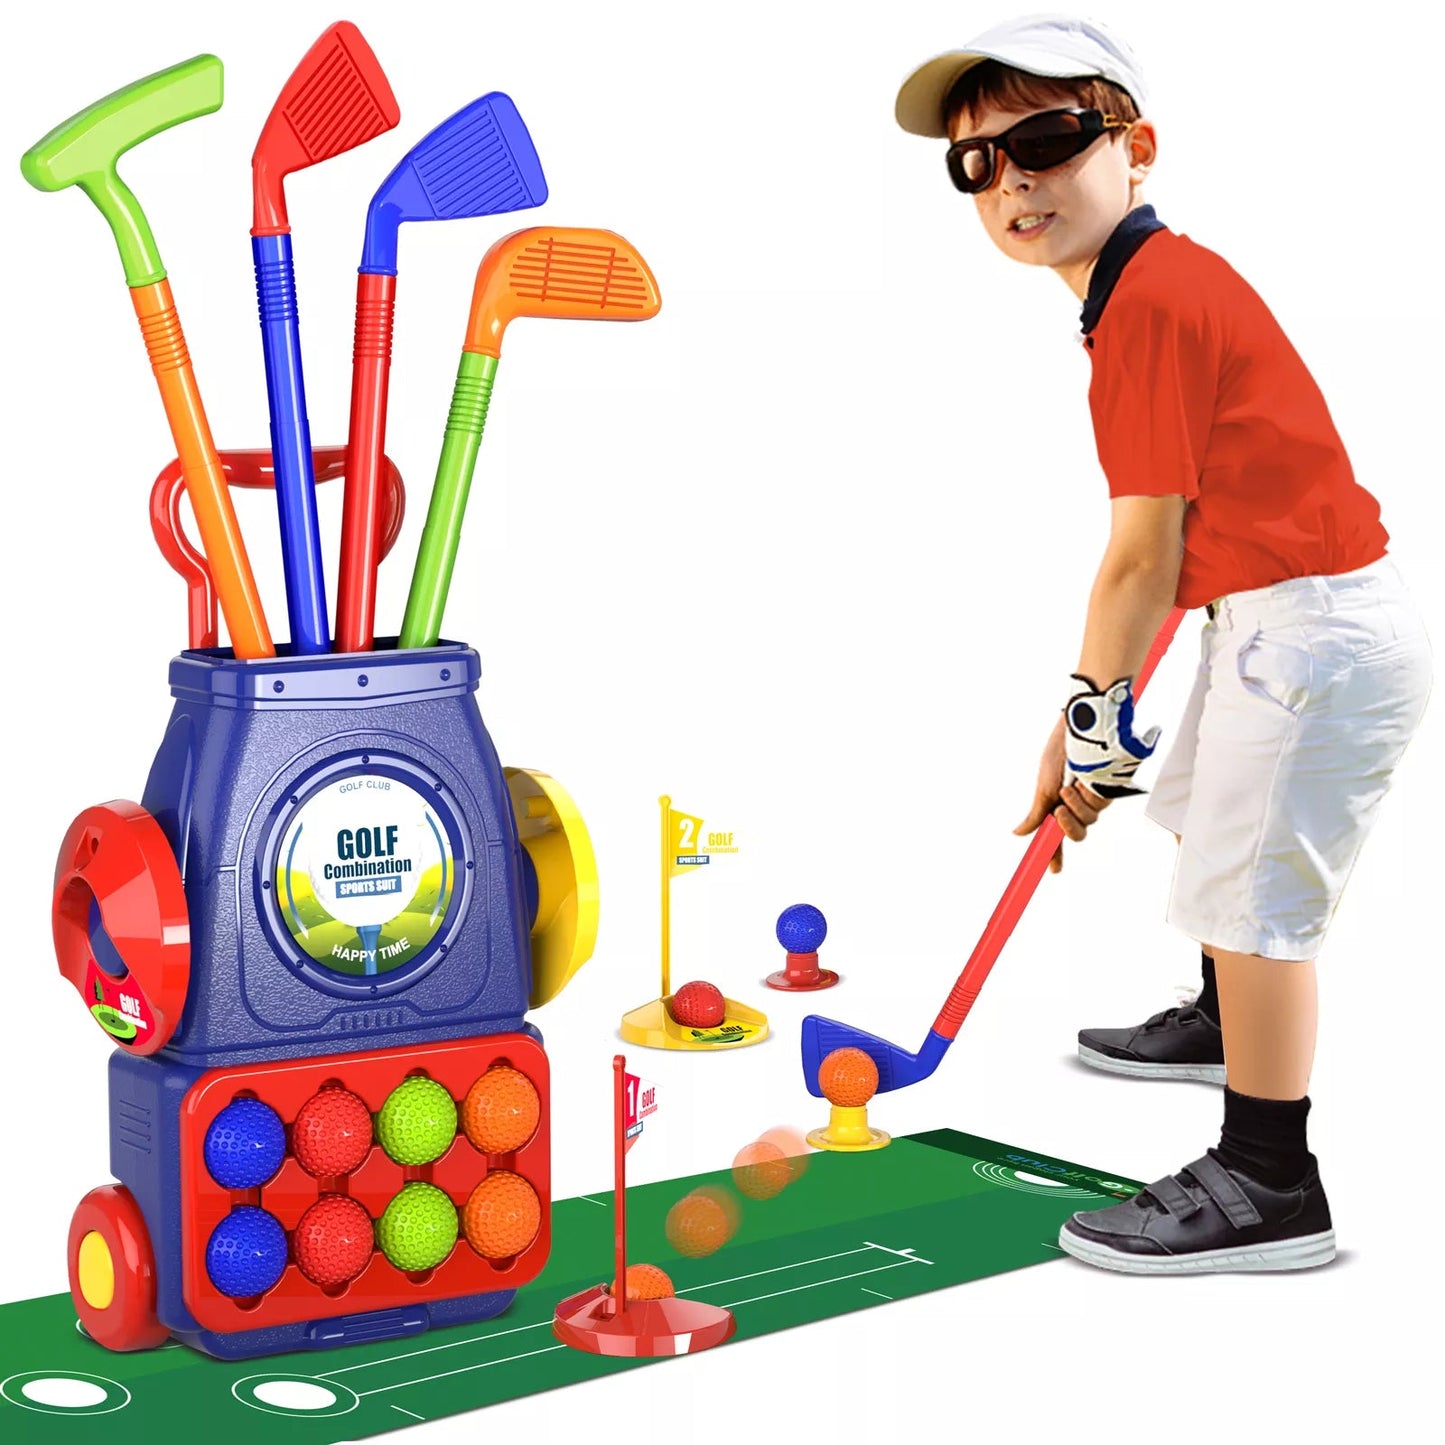 QDRAGON Toddler Golf Club Set with Balls and Practice Mat for Kids 2-5 Years Old